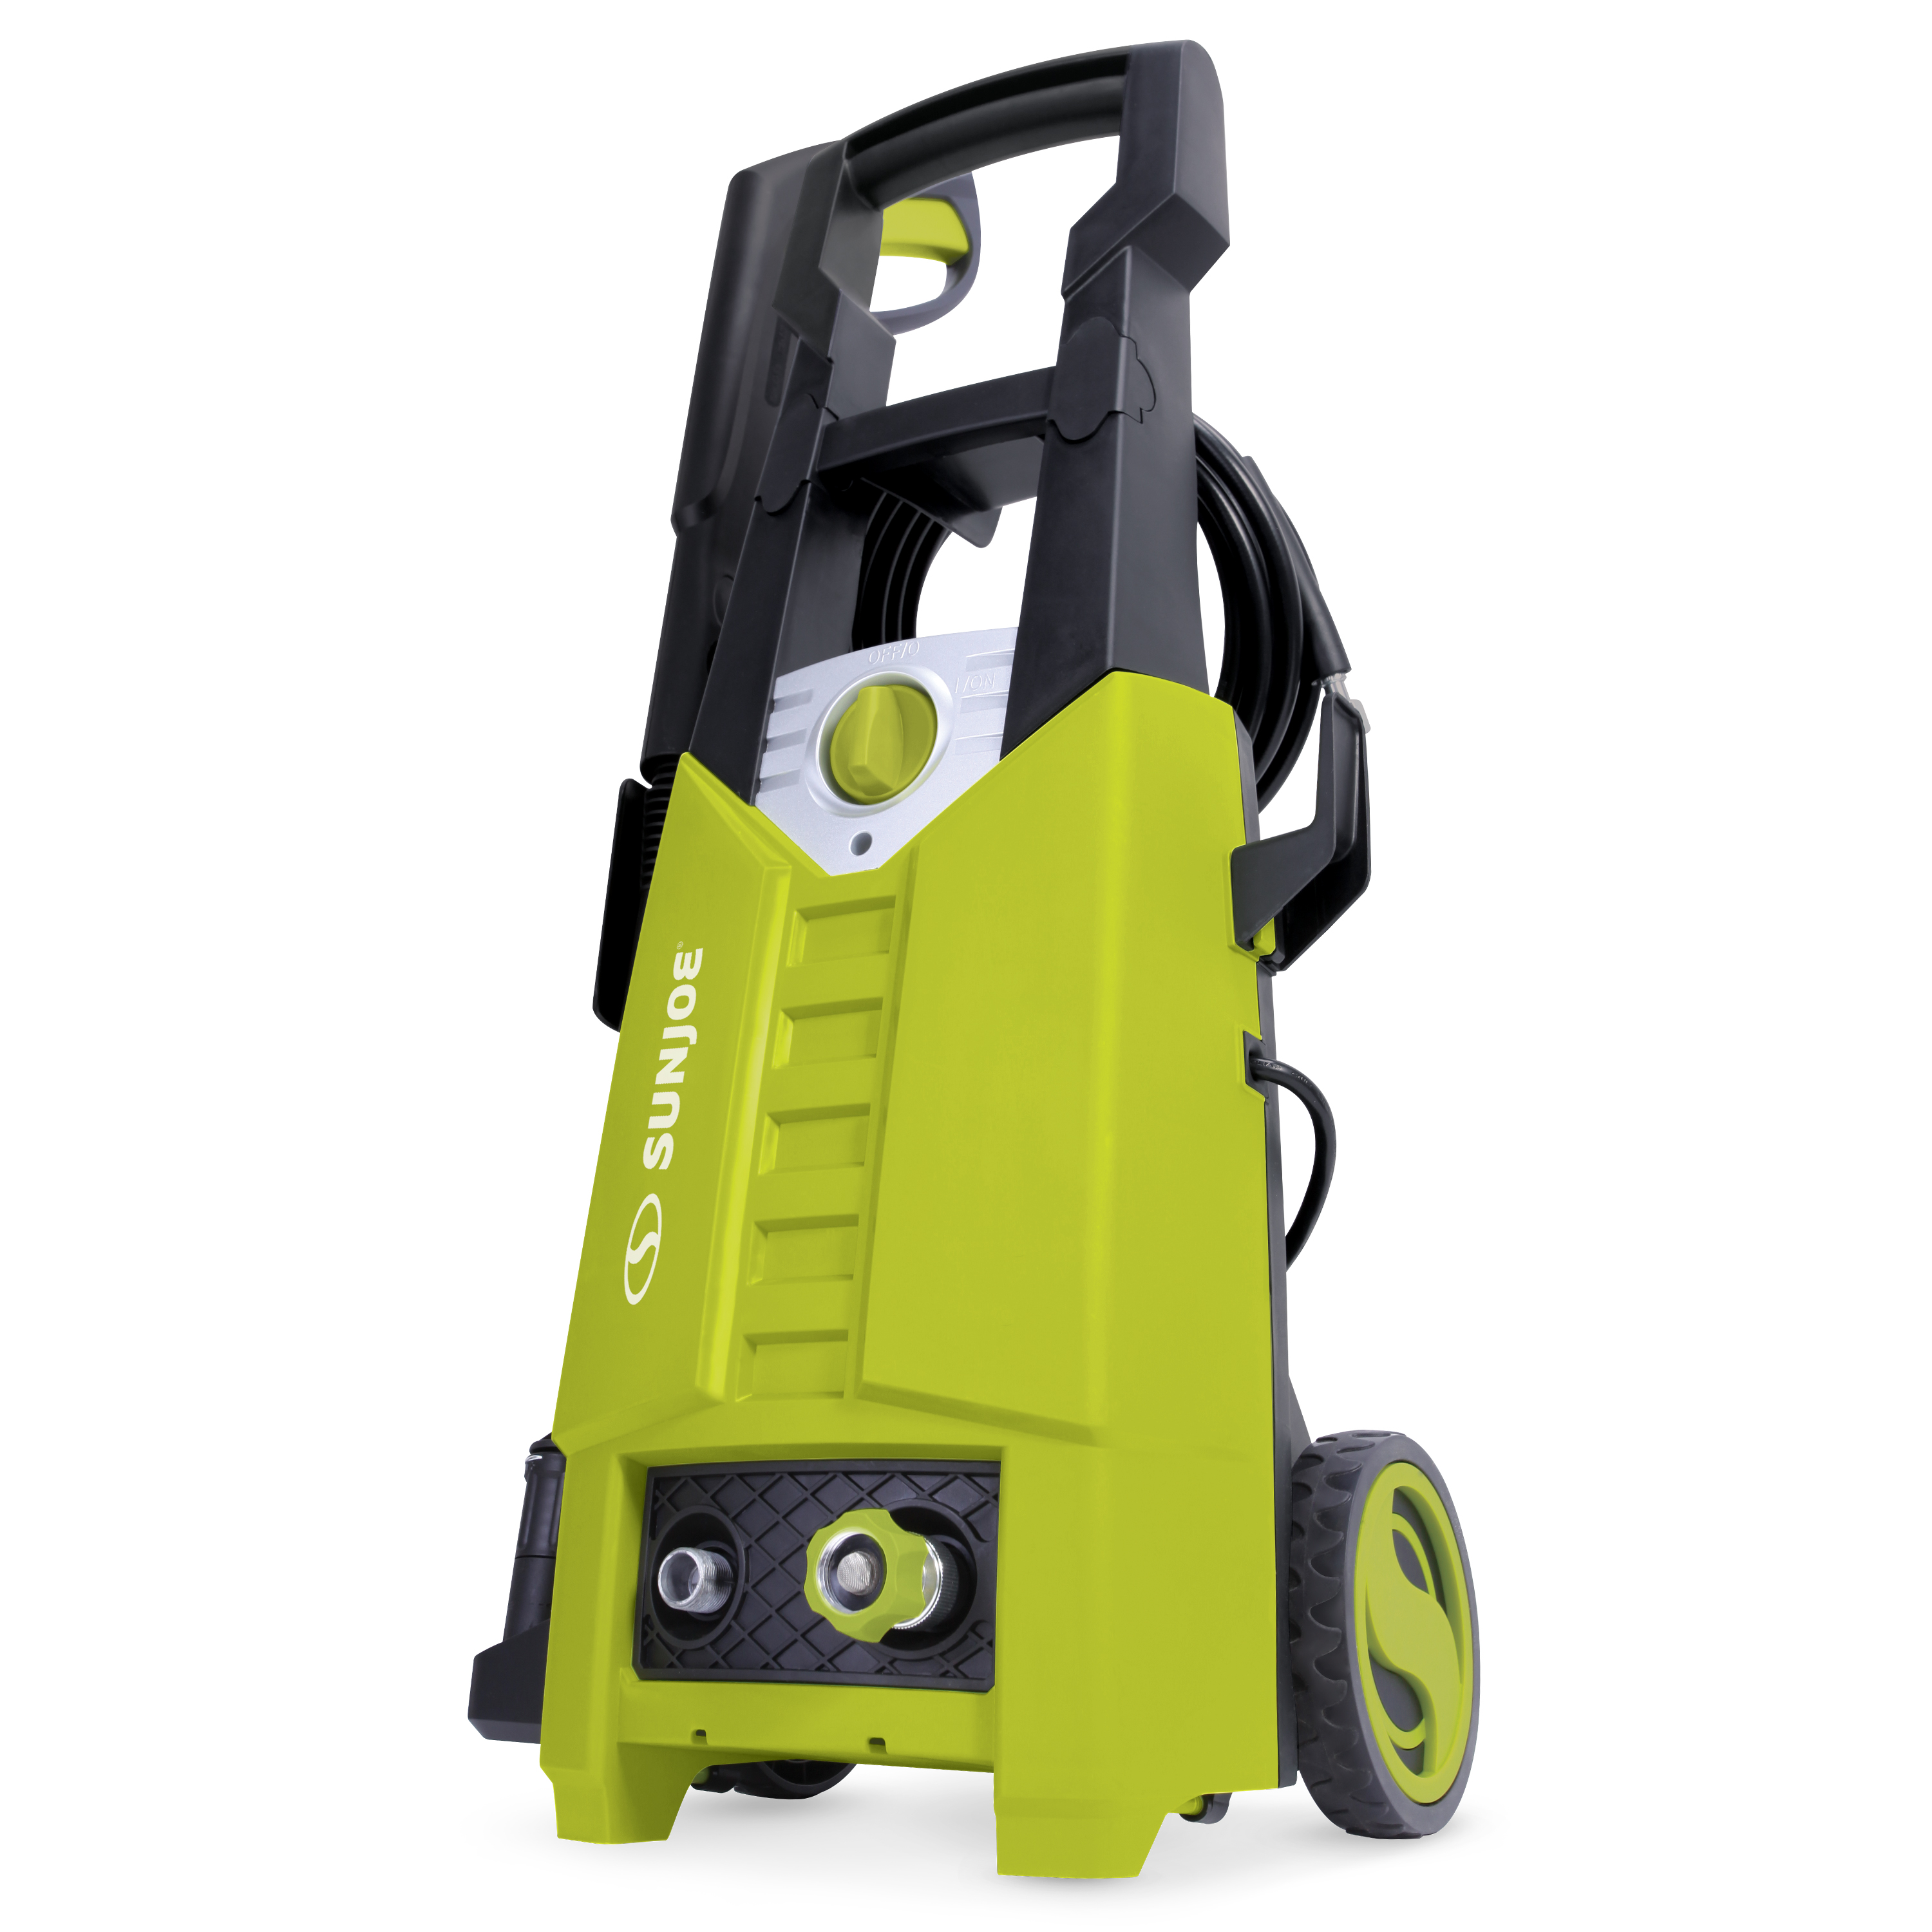 Sun Joe SPX2597 Electric Pressure Washer with Variable Control Lance, 14.5-Amp, Adjustable Wand - image 1 of 6